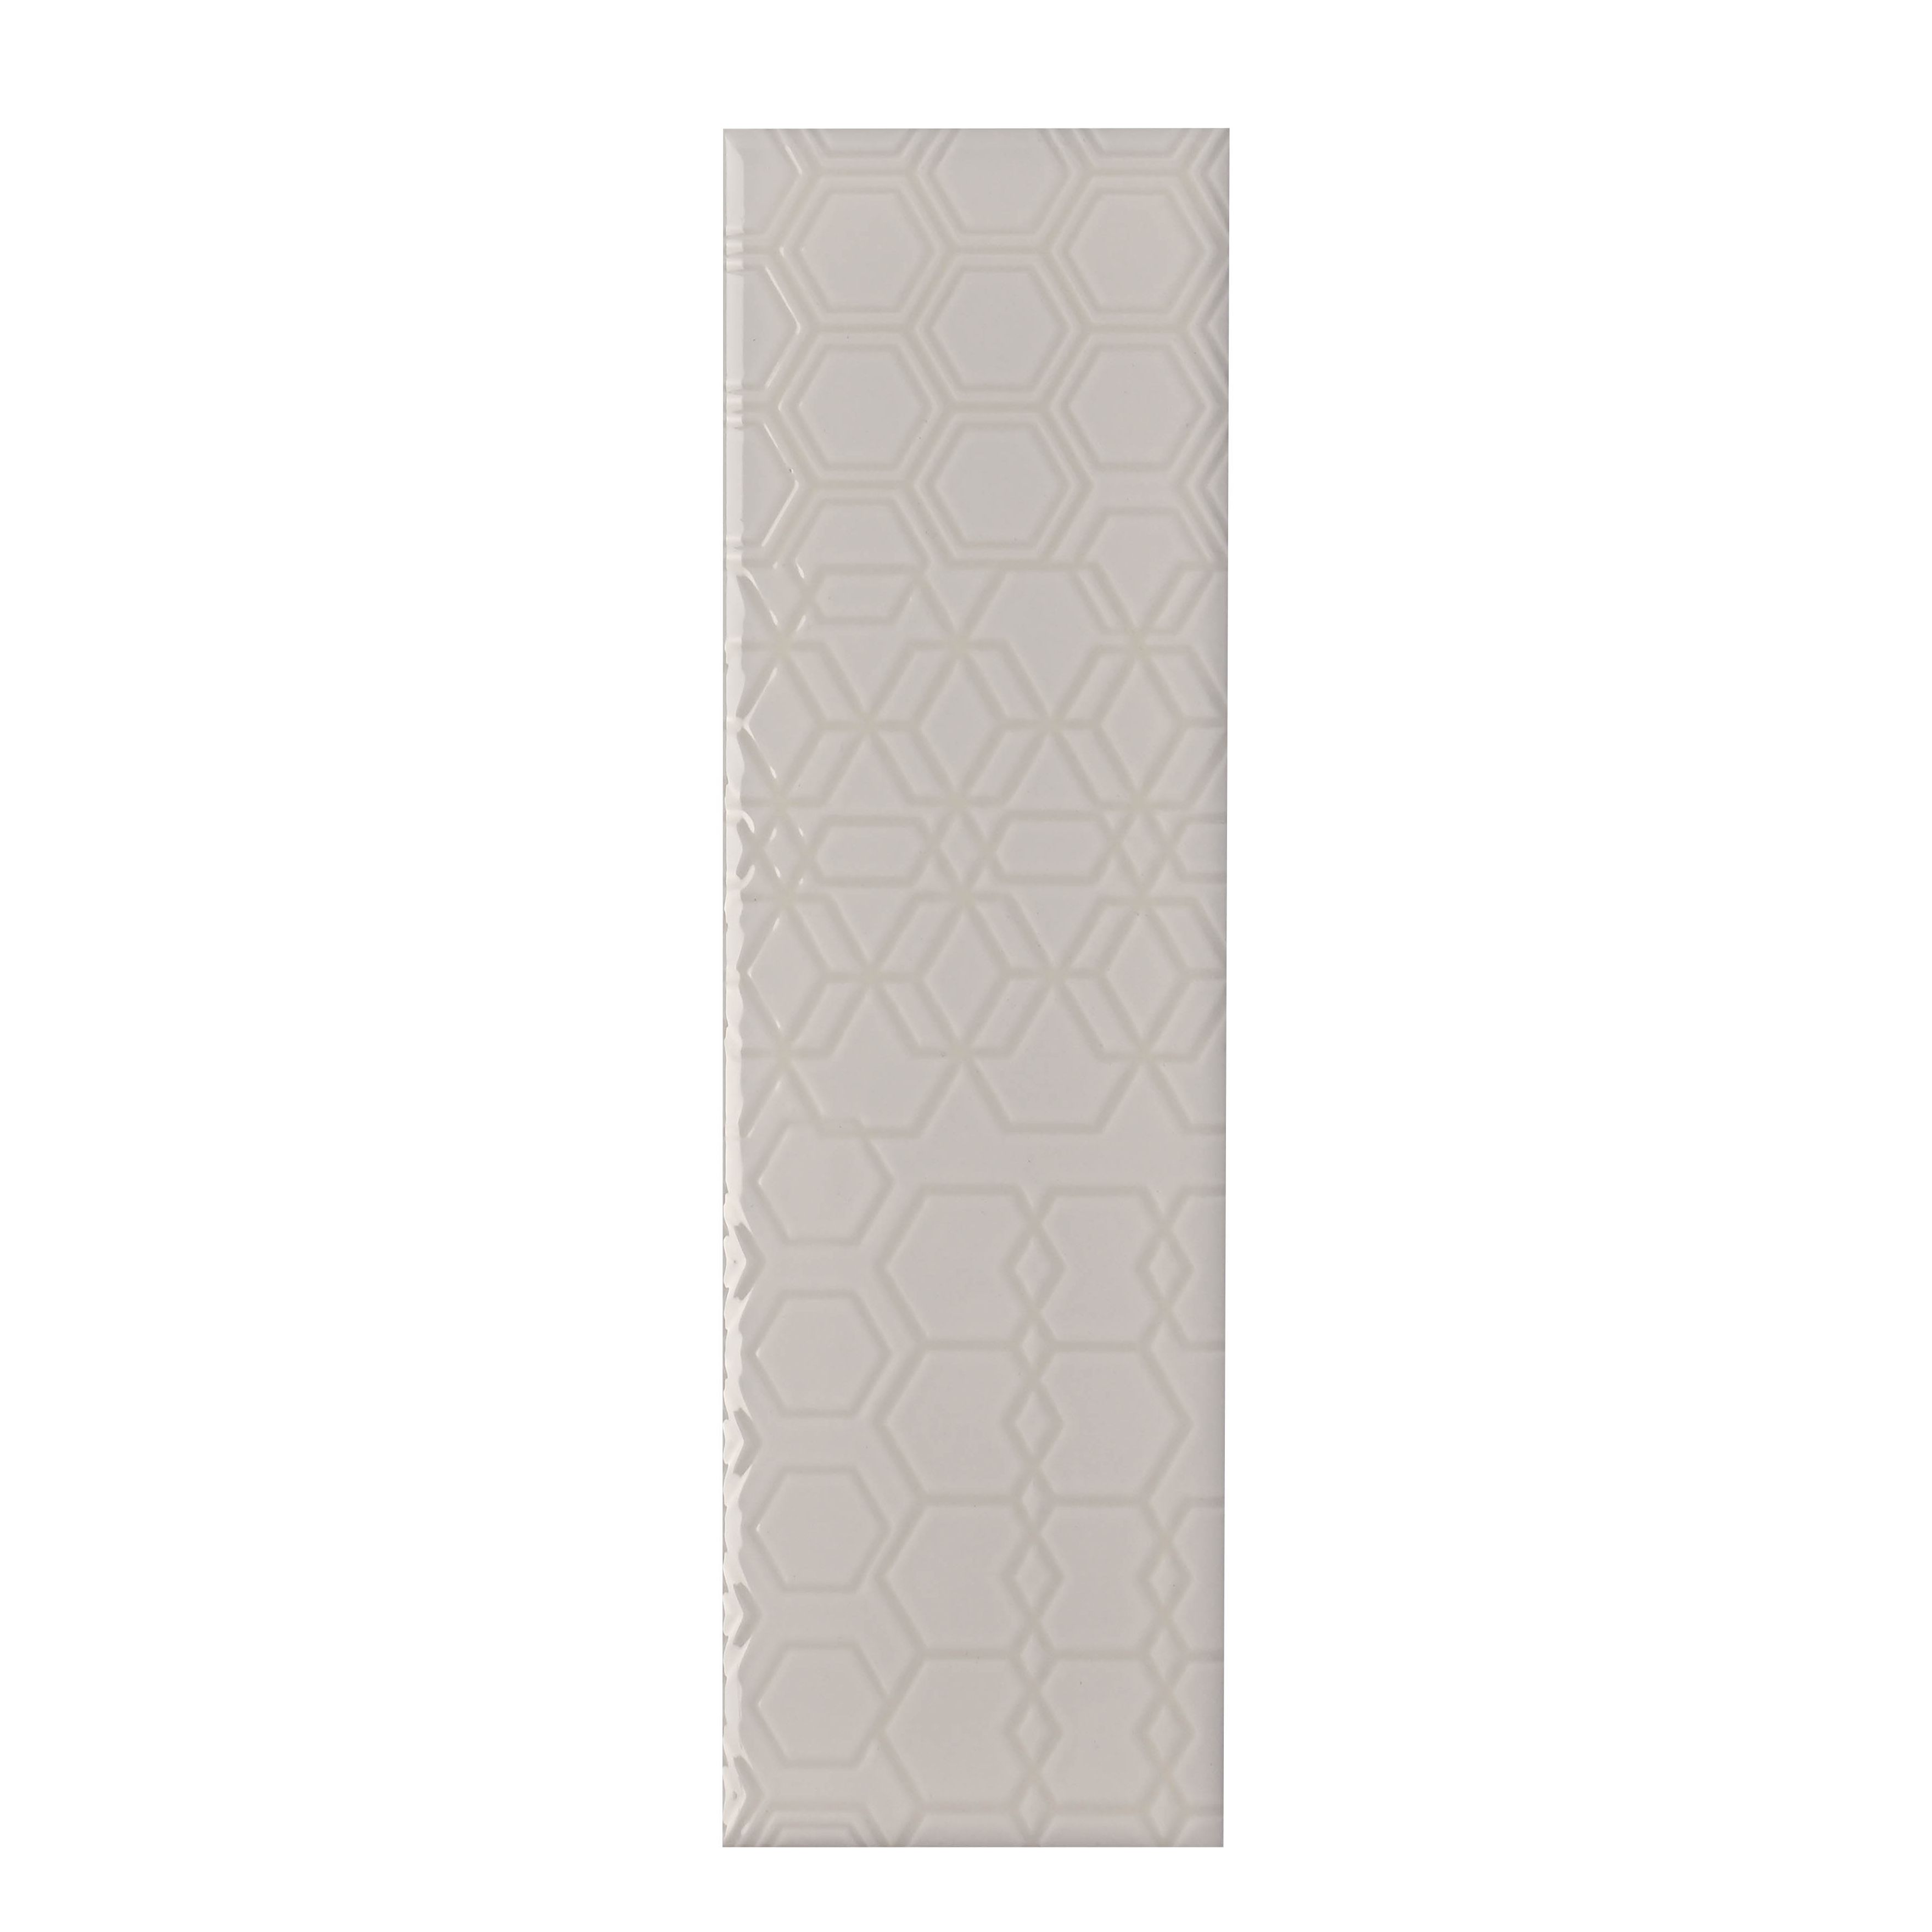 Johnson Tiles Mayfair White Gloss Patterned Textured Ceramic Indoor Wall Tile, Pack of 54, (L)245mm (W)75mm